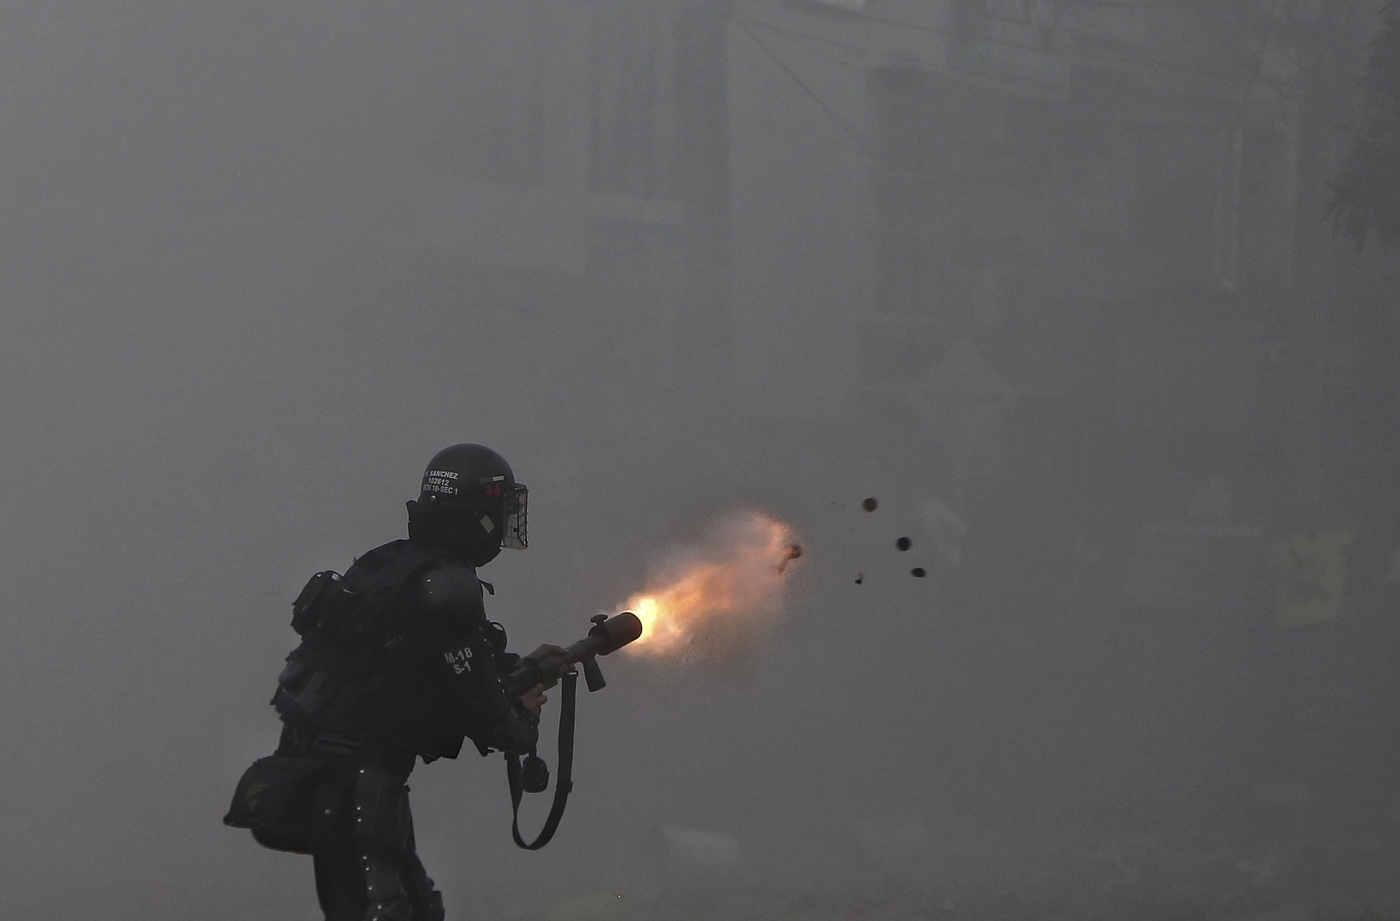 A police officer fires tear gas at protesters during a national strike against tax reform in Cali, Colombia, Monday, May 3, 2021. Colombia's President Ivan Duque withdrew the government-proposed tax reform on Sunday. (AP Photo/Andres Gonzalez)